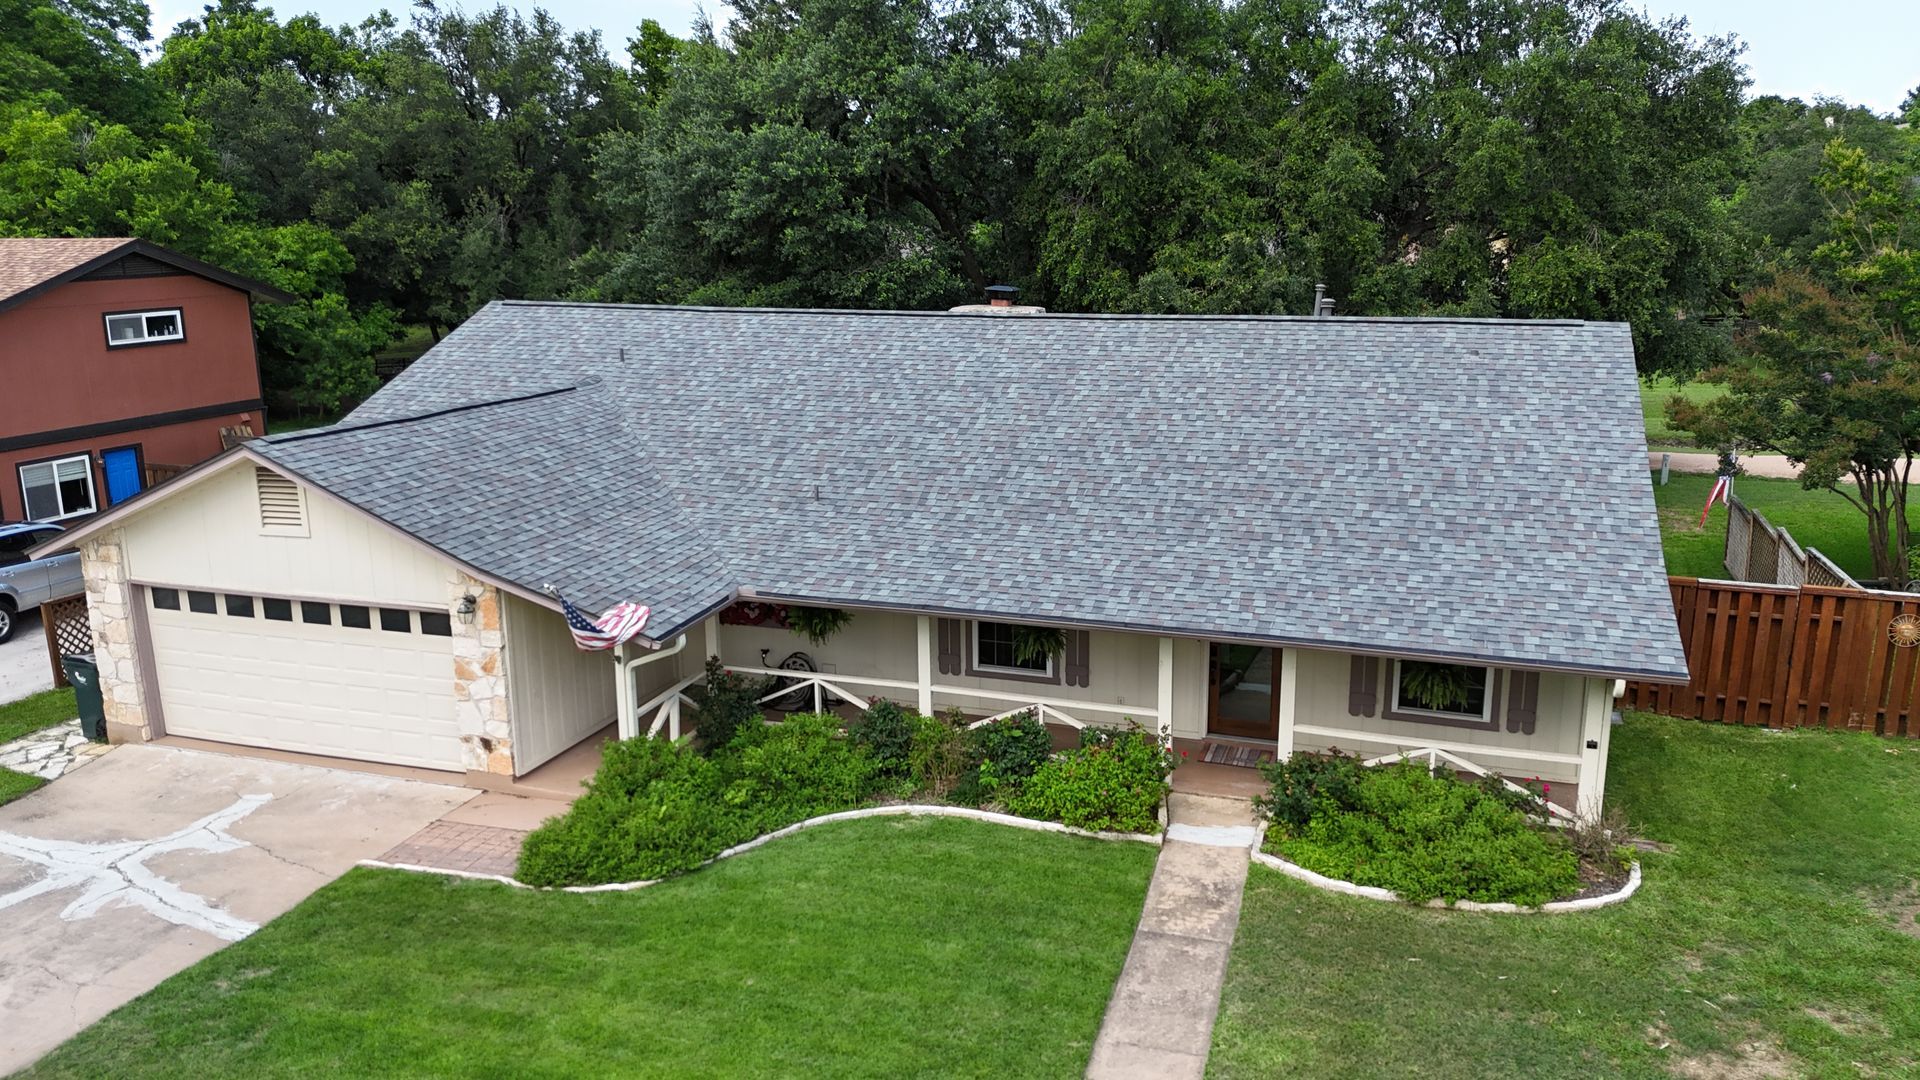 Atlas Pinnacle® Pristine Summer Storm Architectural Roofing Shingles